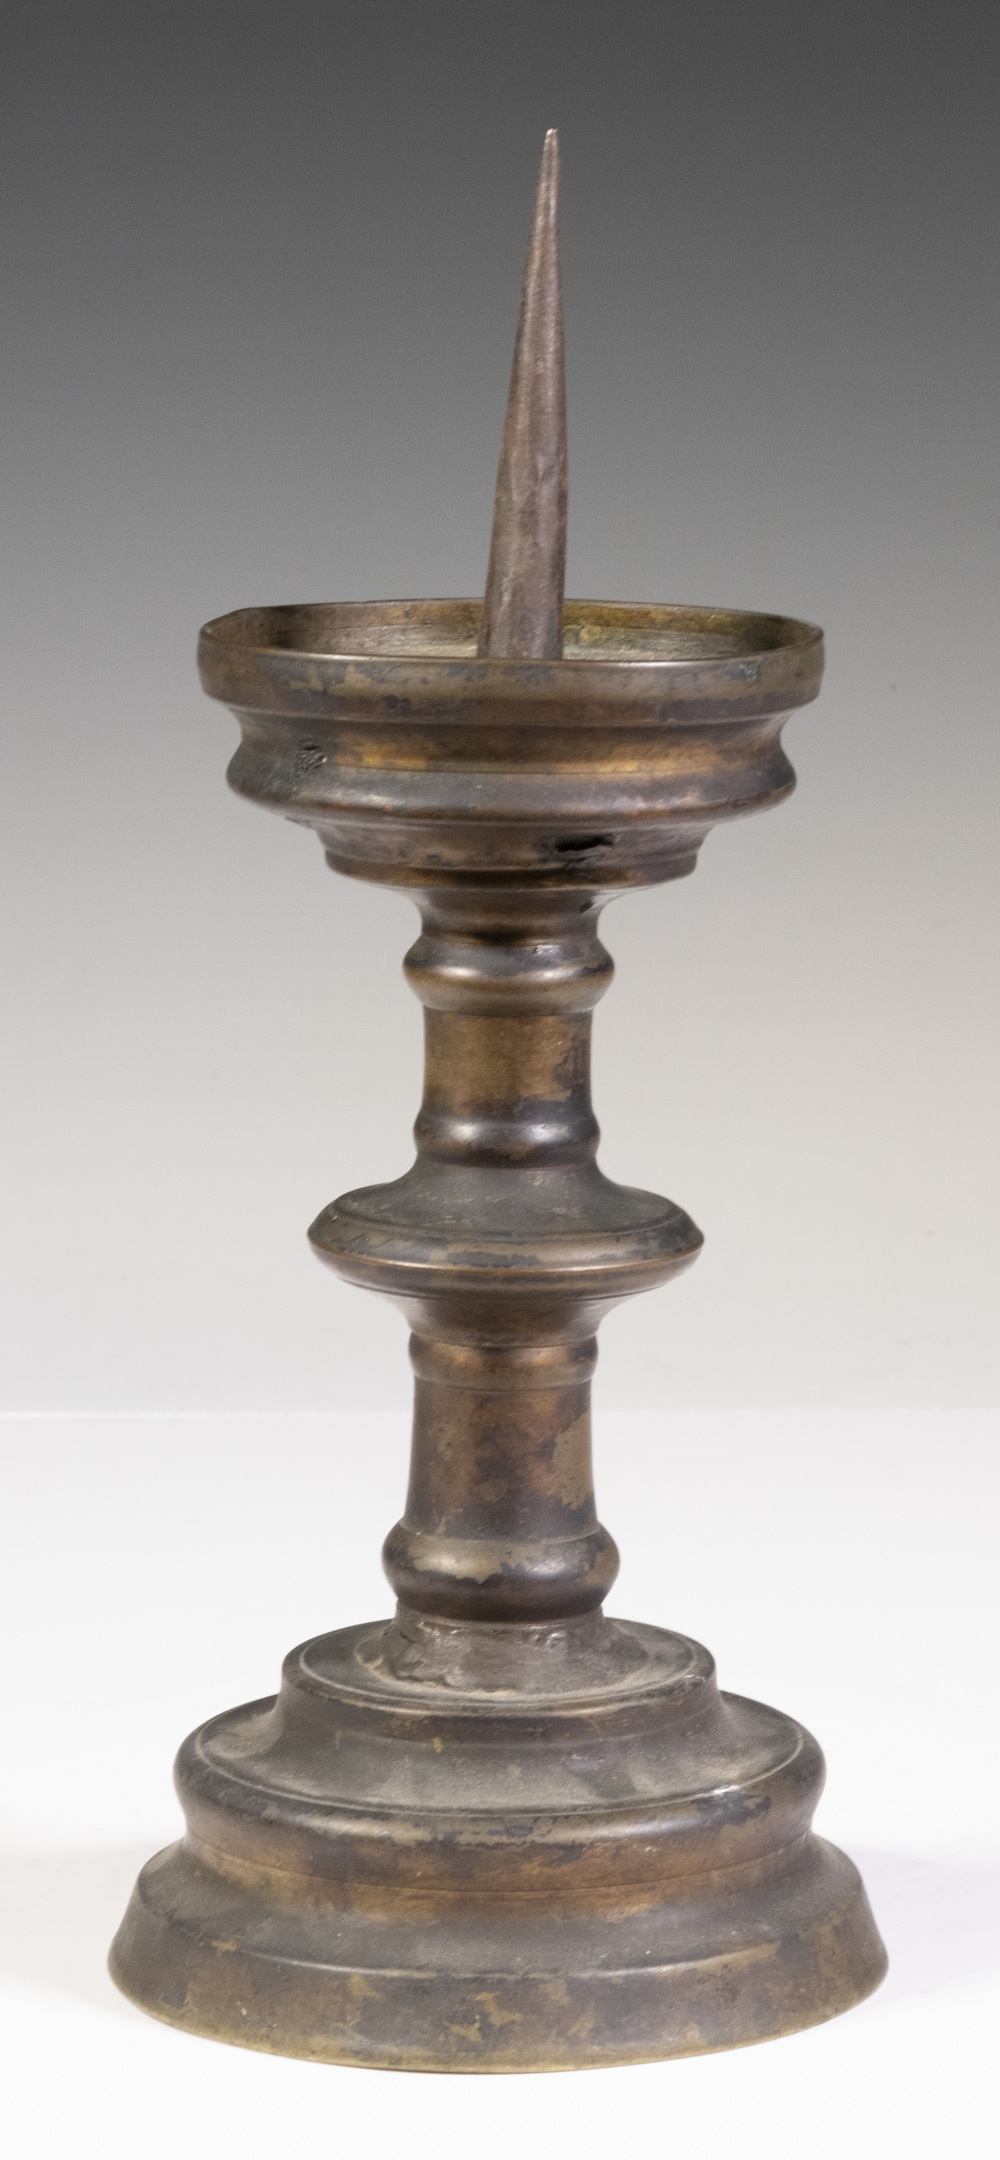 16TH C. BRONZE PRICKET CANDLESTICK Late